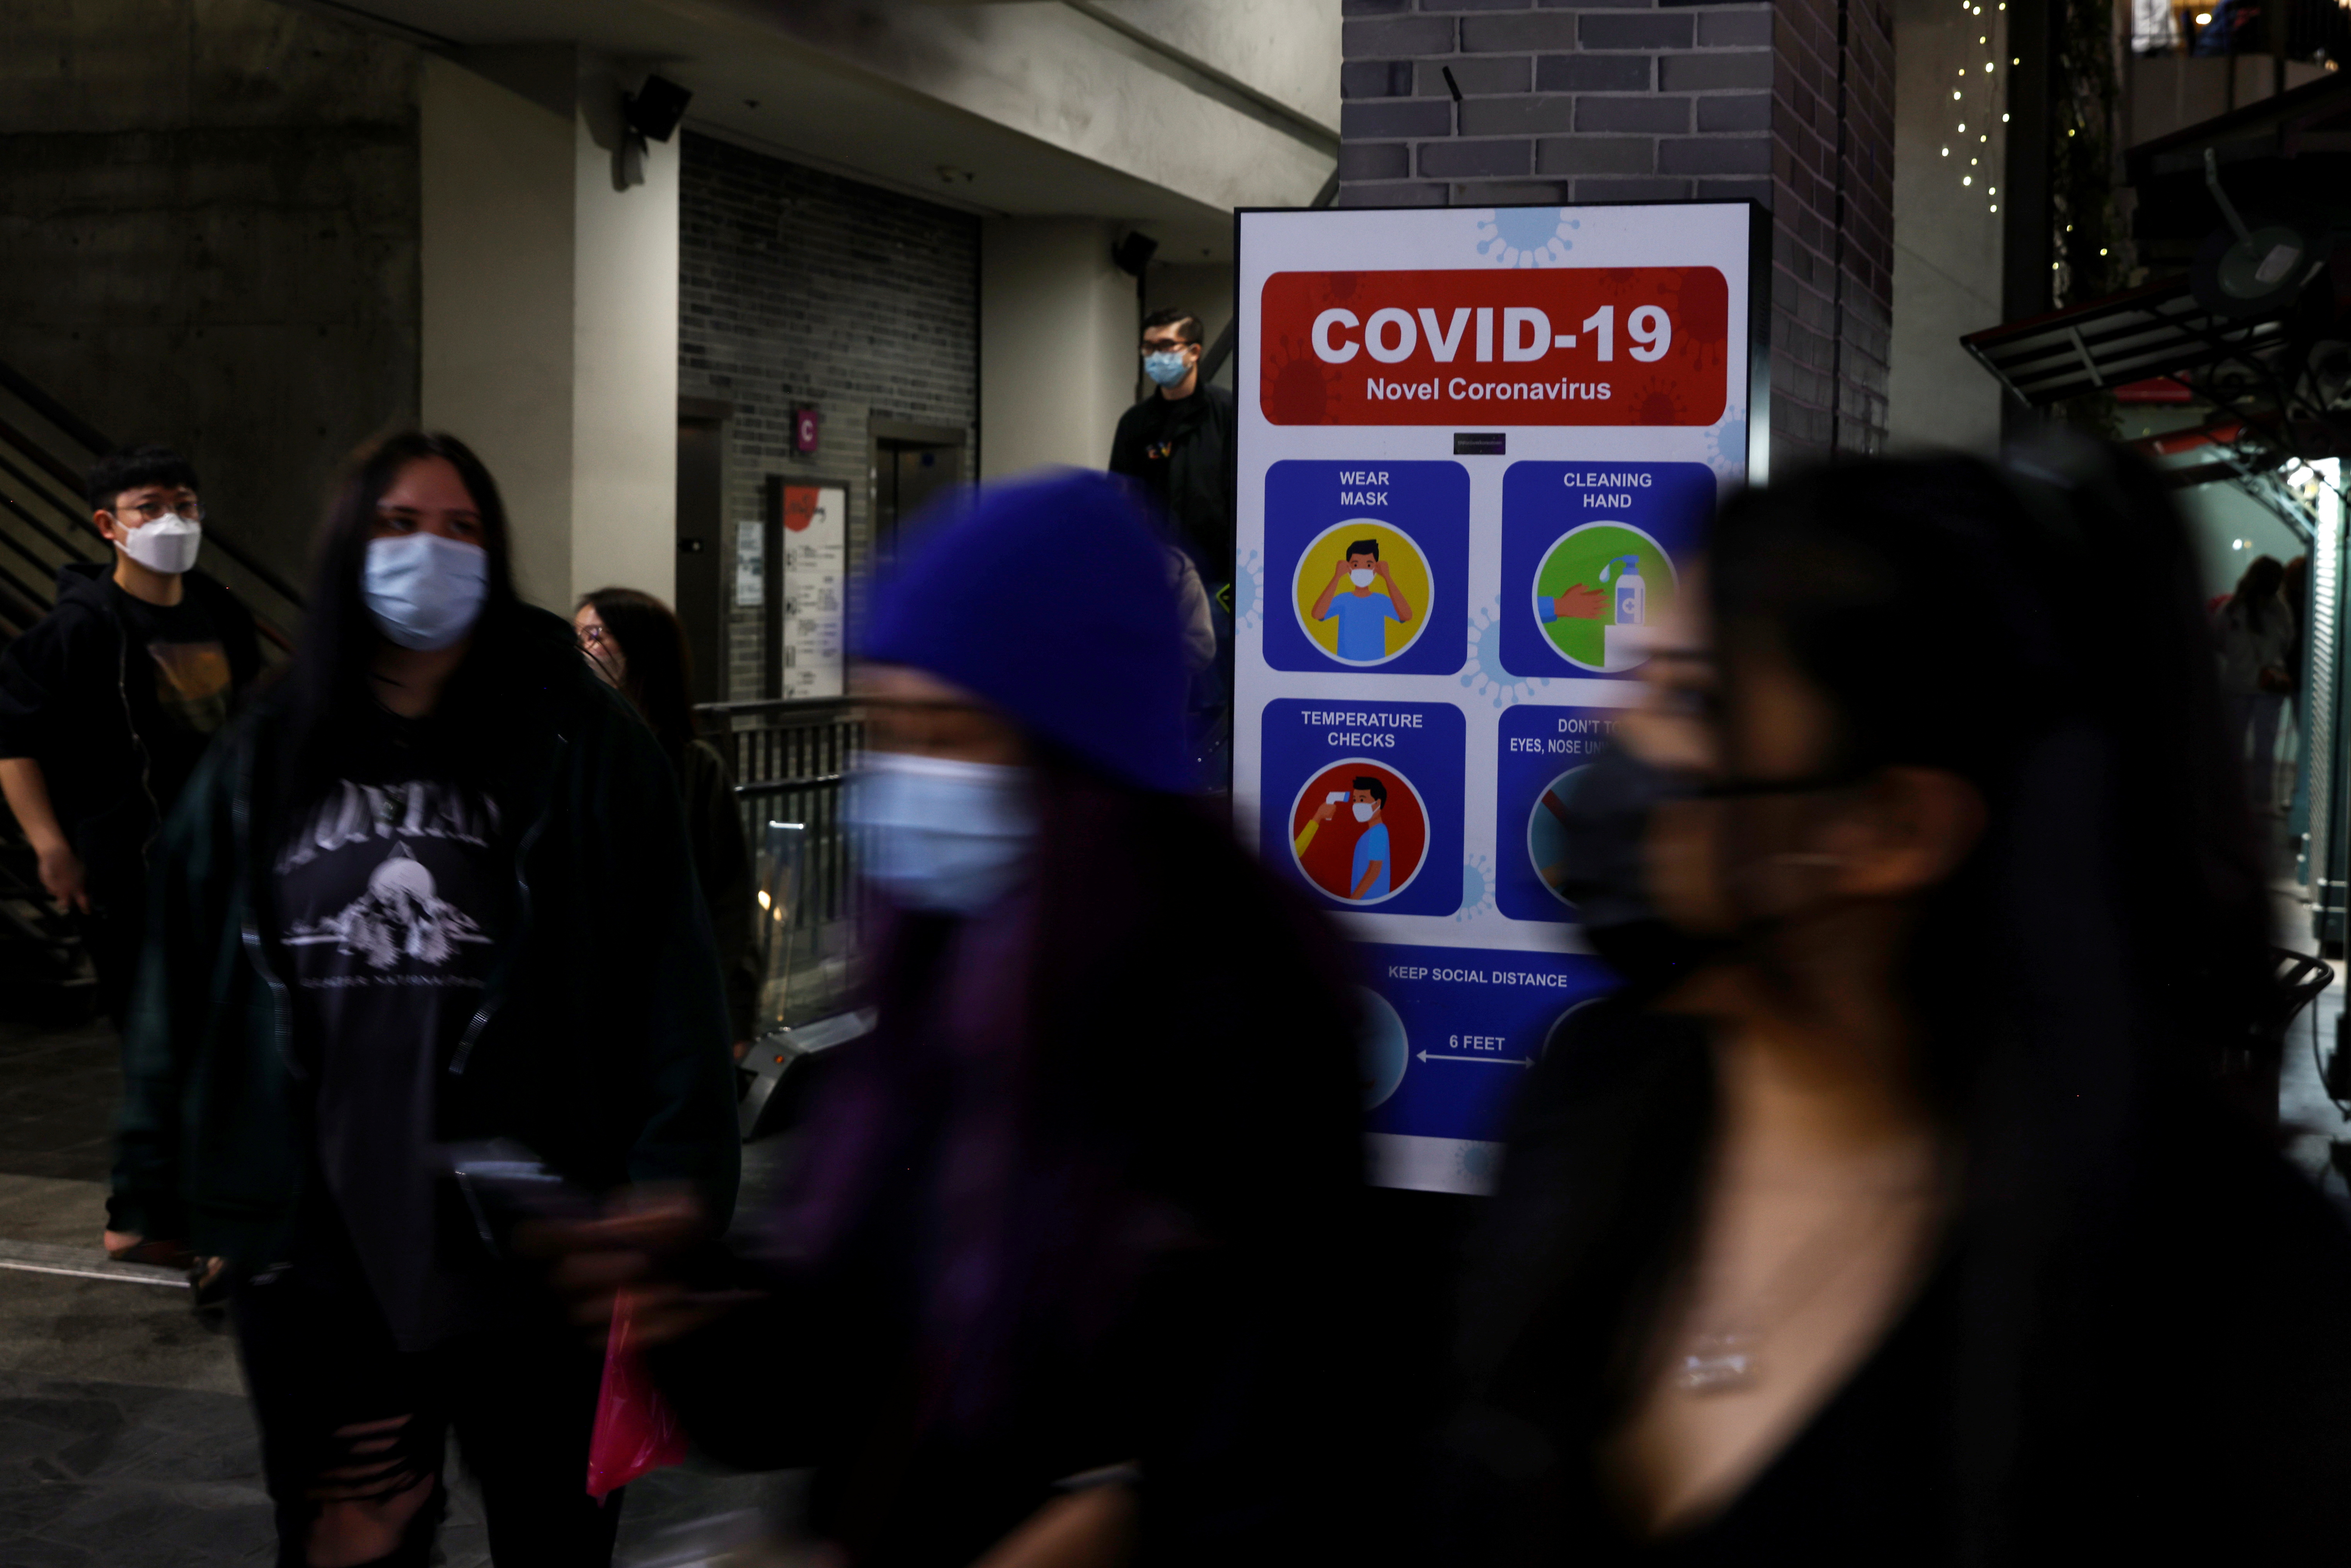 People walk with protective face masks, amid the coronavirus disease (COVID-19) pandemic, in the Koreatown section of Los Angeles, California